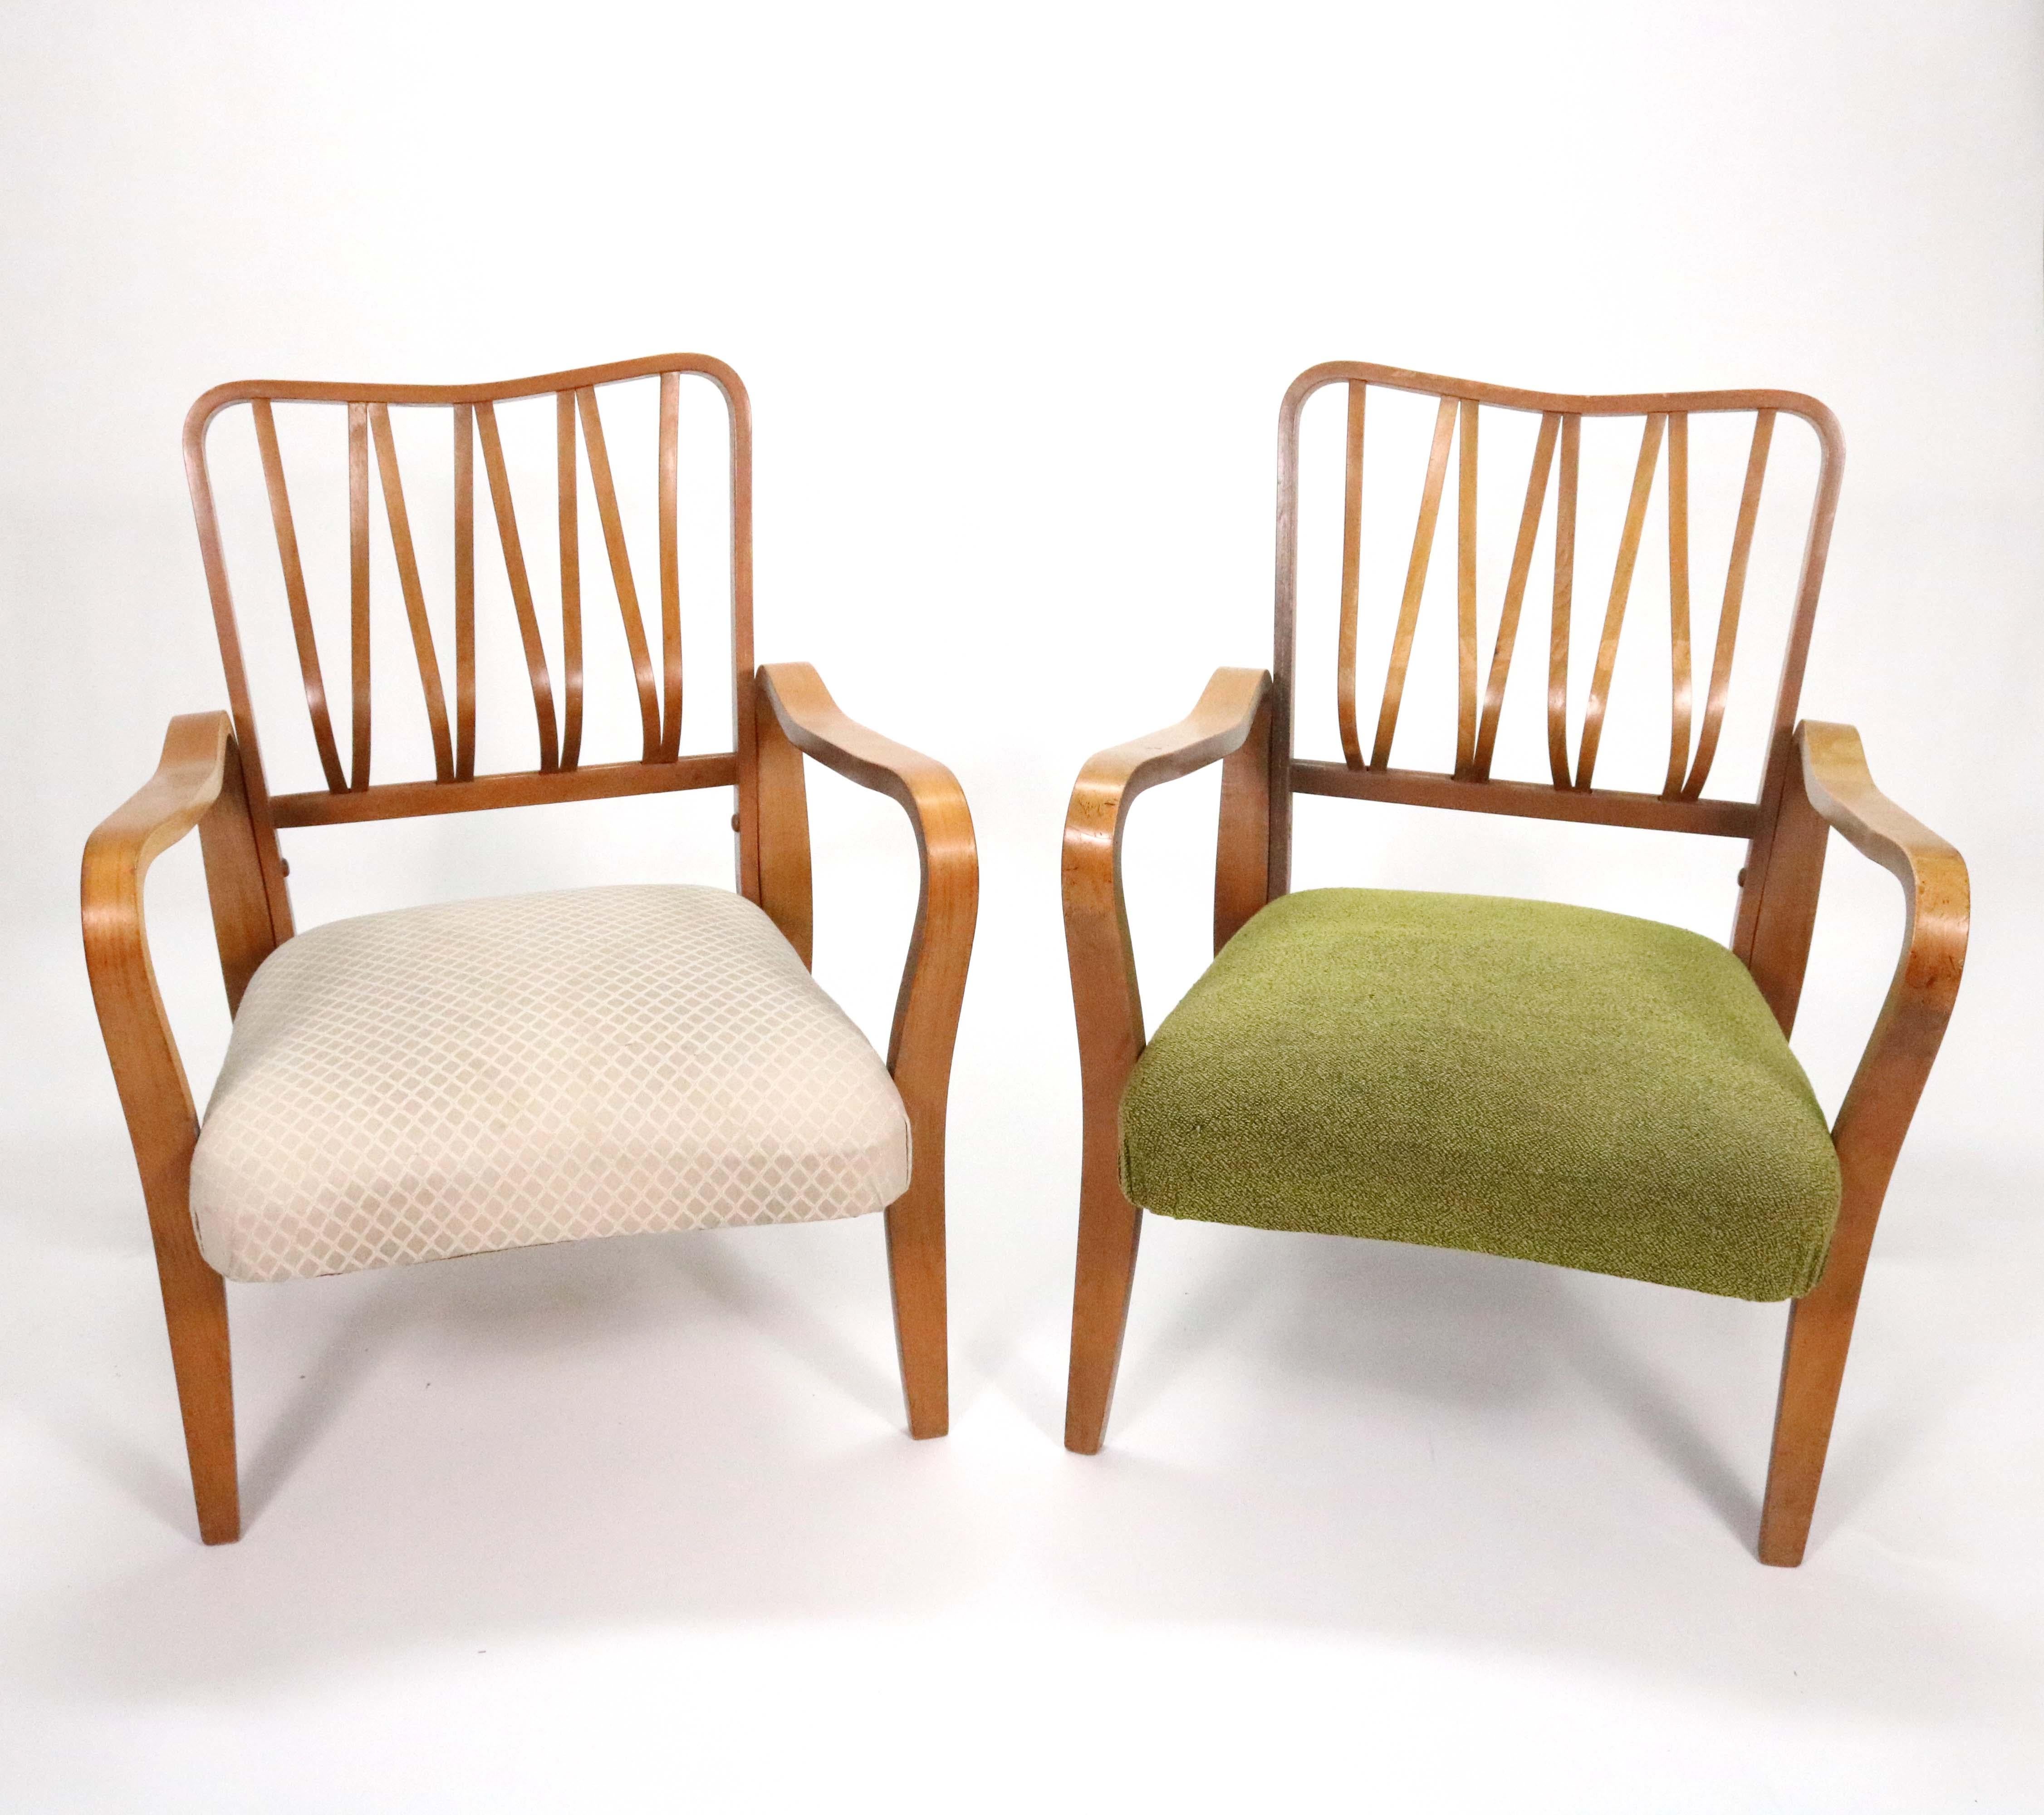 A pair of elegant beechwood Linden Arm Chairs designed by G. A. Jenkins & Eric Lyons for Packet Furniture in 1948 and manufactured in the 1950s. 

Professional reupholstery and refinishing available at pass-through costs.